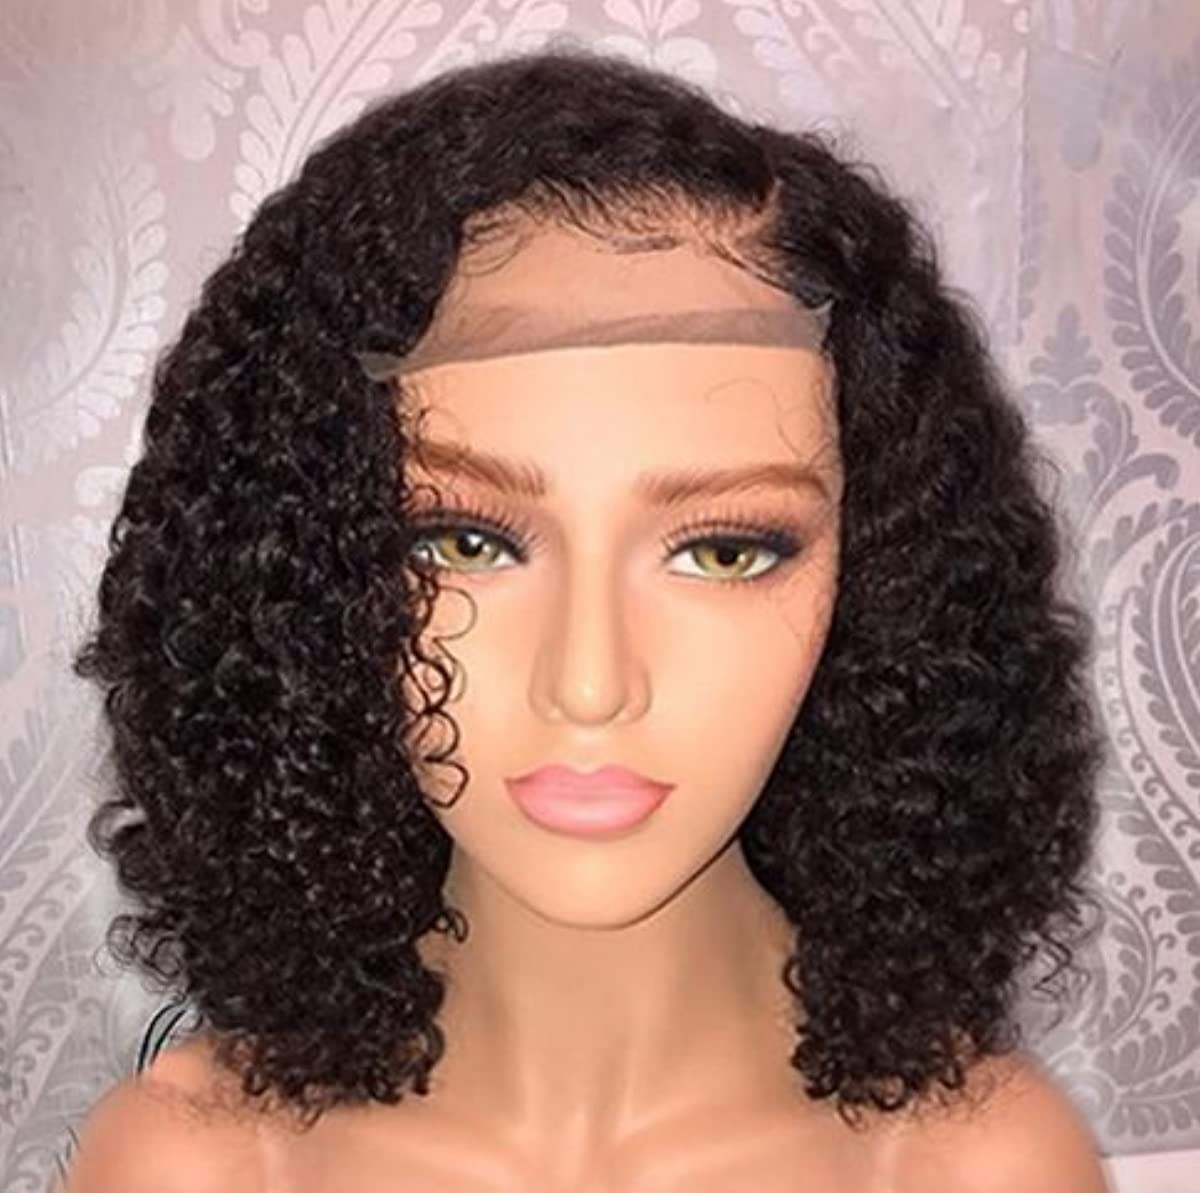 Dorosy Hair Lace Front Wigs Human Hair Wigs for Black Women 13x4 Lace Front Wigs Brazilian Wet Short Bob Curly Wigs Glueless Pre Plucked with Baby Hair(12 inch)